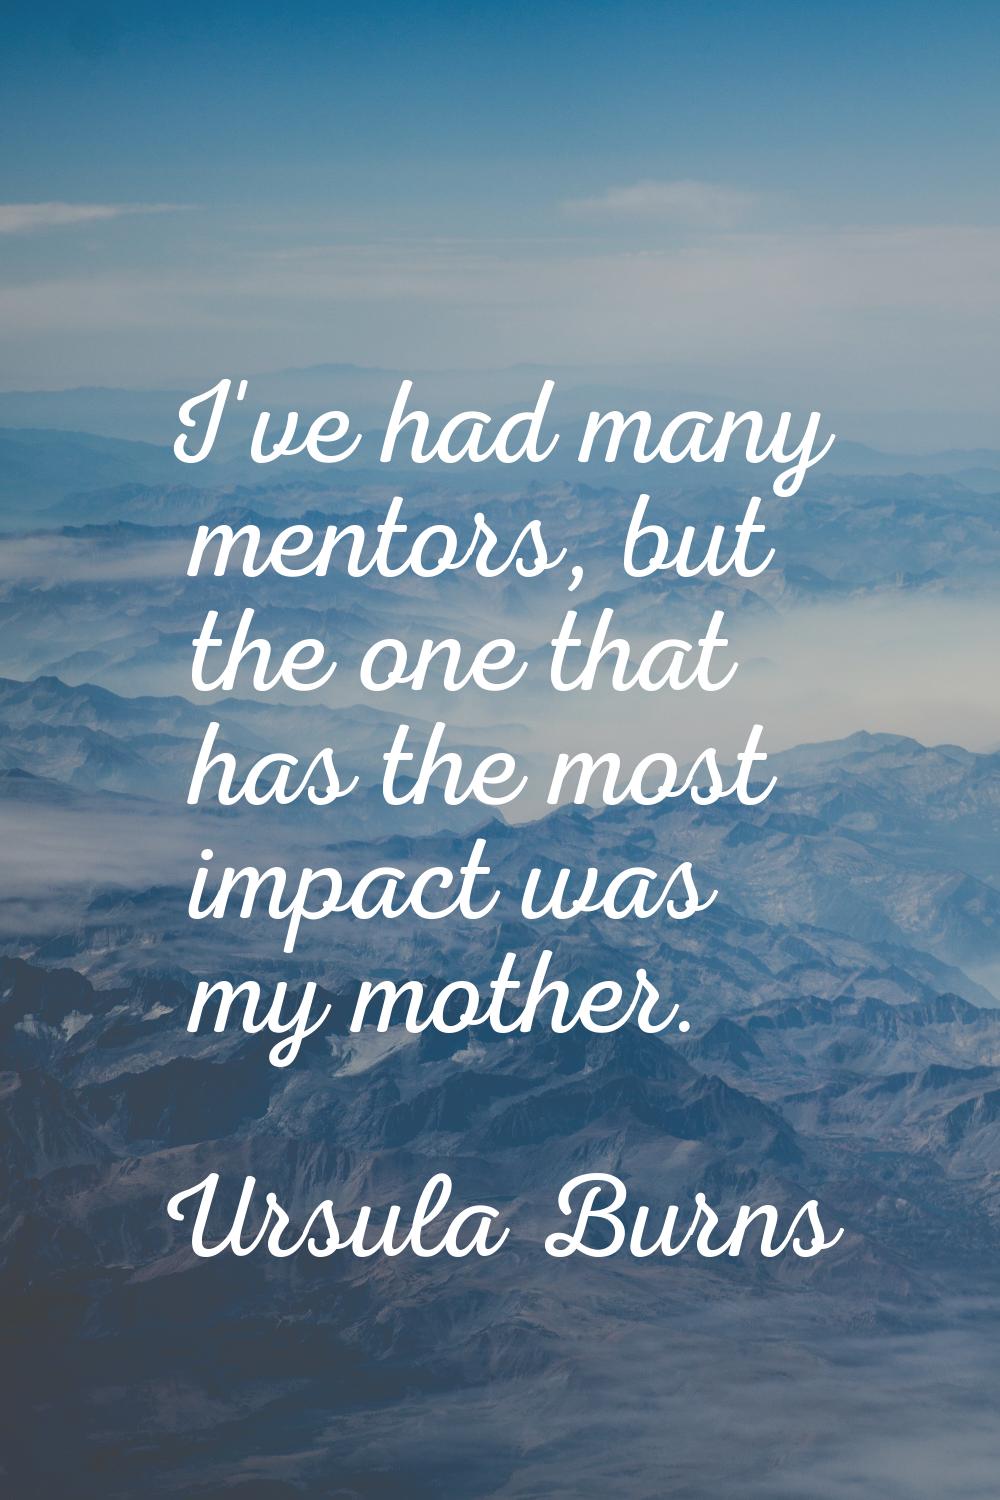 I've had many mentors, but the one that has the most impact was my mother.